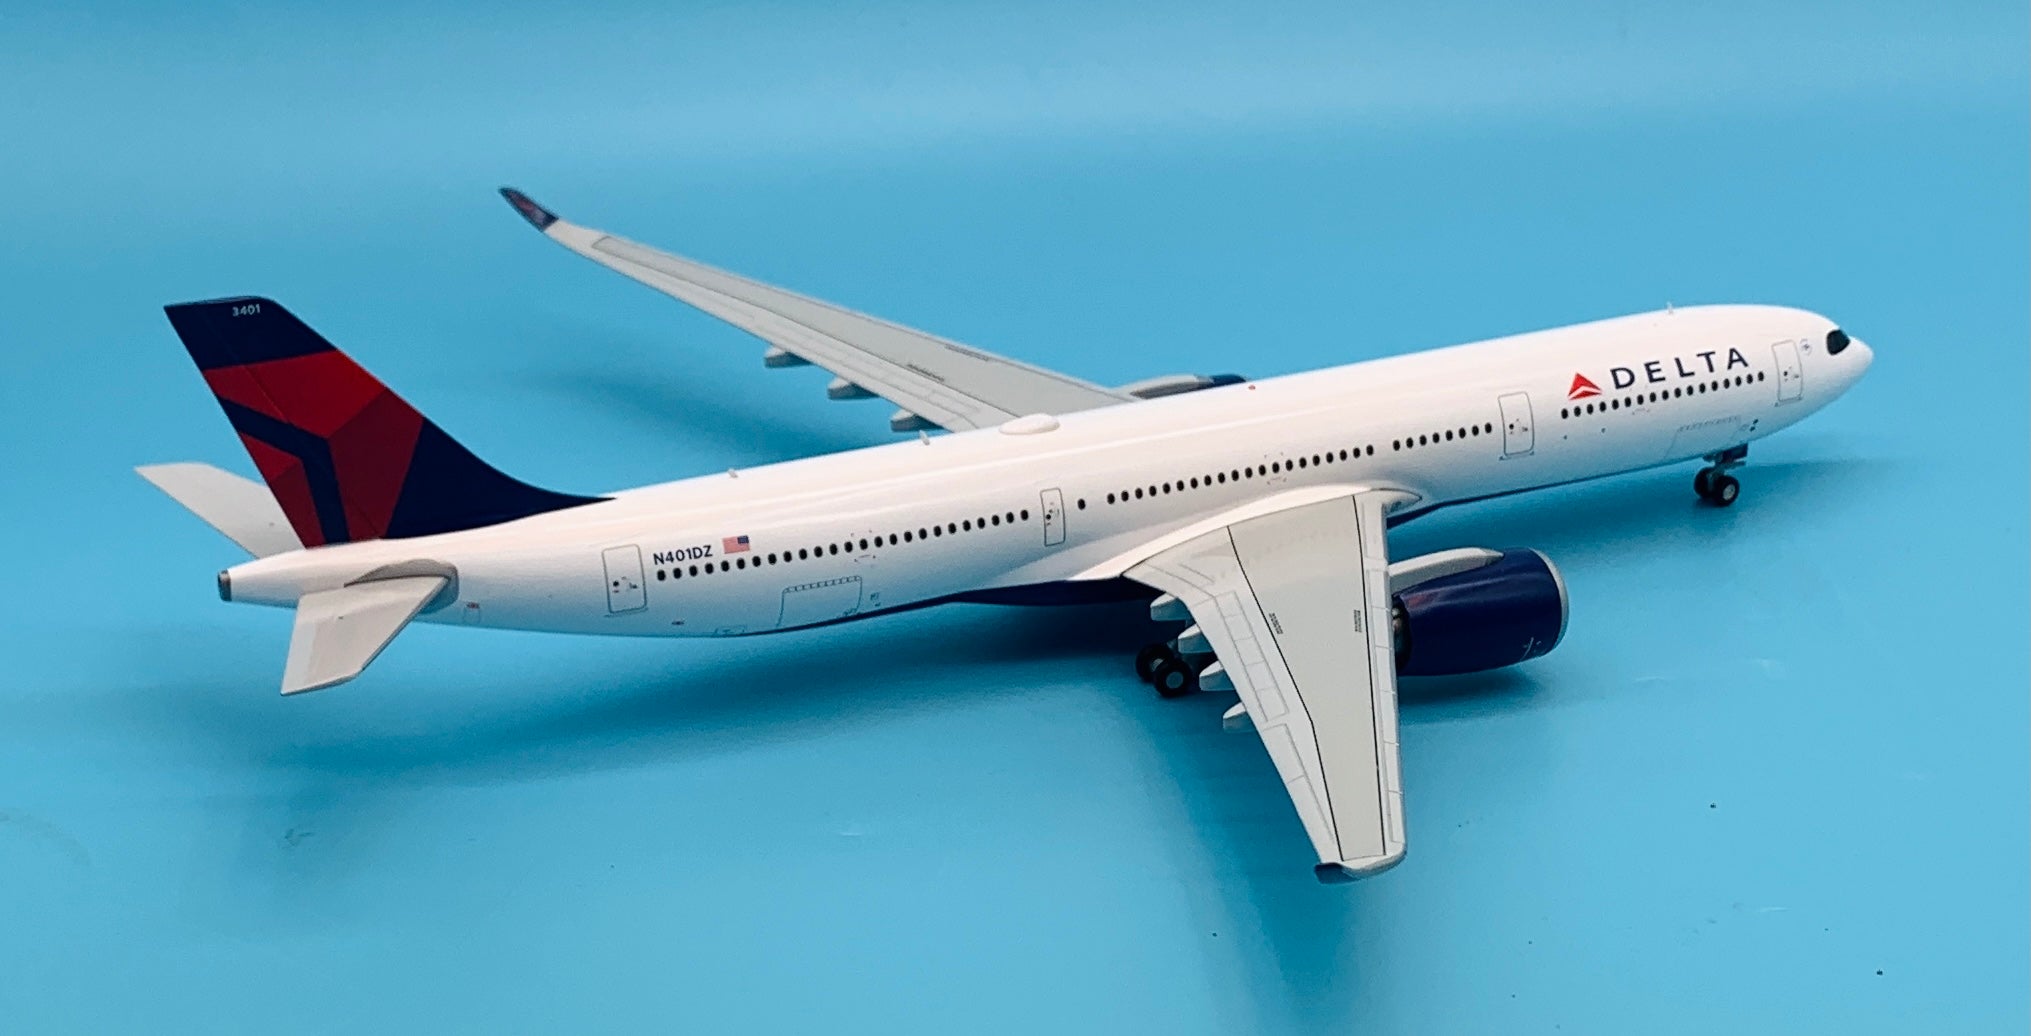 Gemini Jets 1/200 Delta Airlines Airbus A330-900 N401DZ G2DAL968 